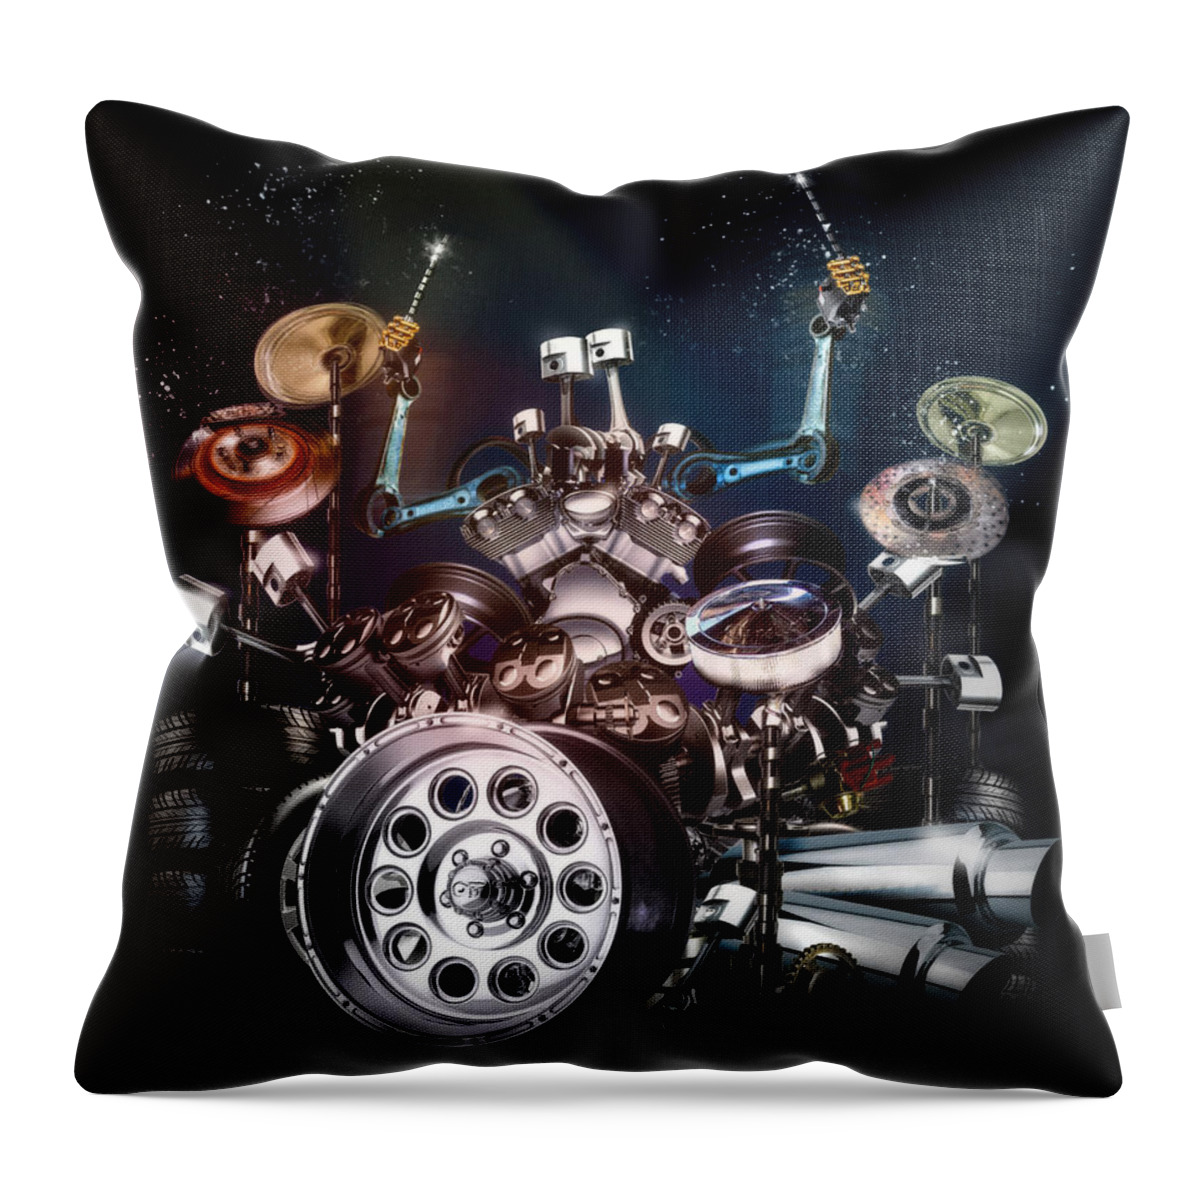 Drum Throw Pillow featuring the digital art Drum Machine - The Band's Engine by Alessandro Della Pietra